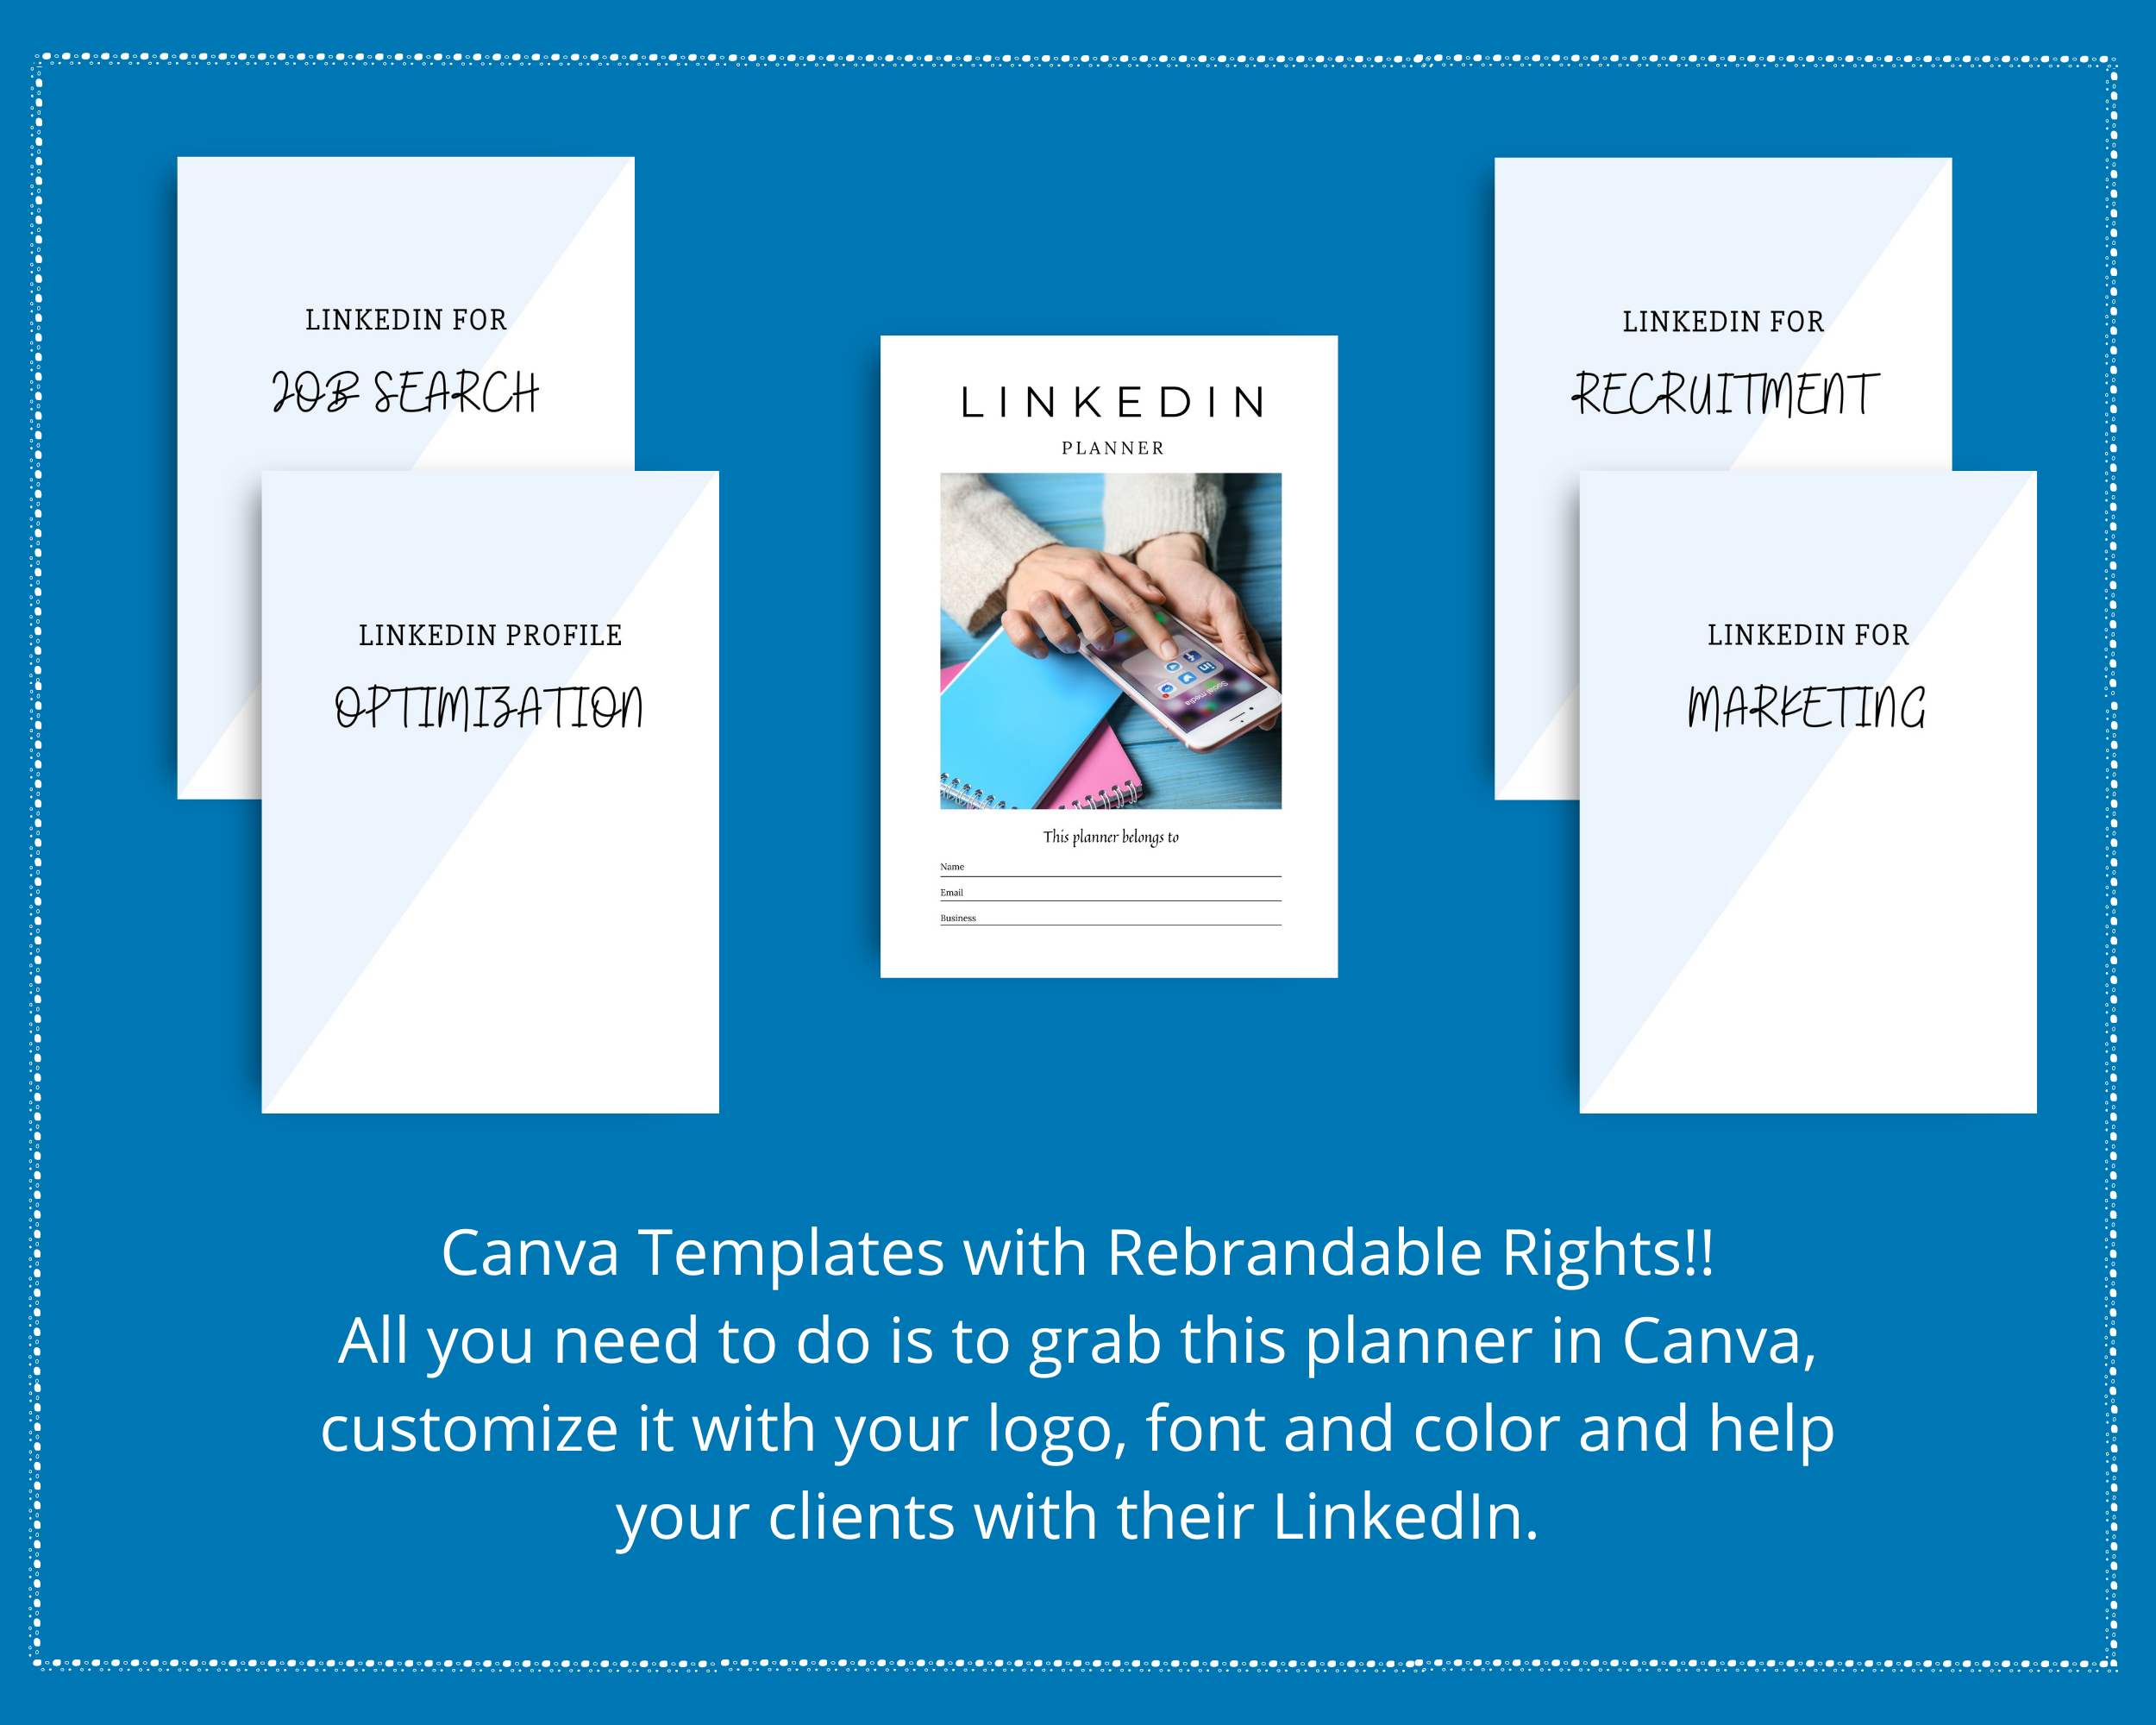 Editable LinkedIn Planner in Canva | Commercial Use